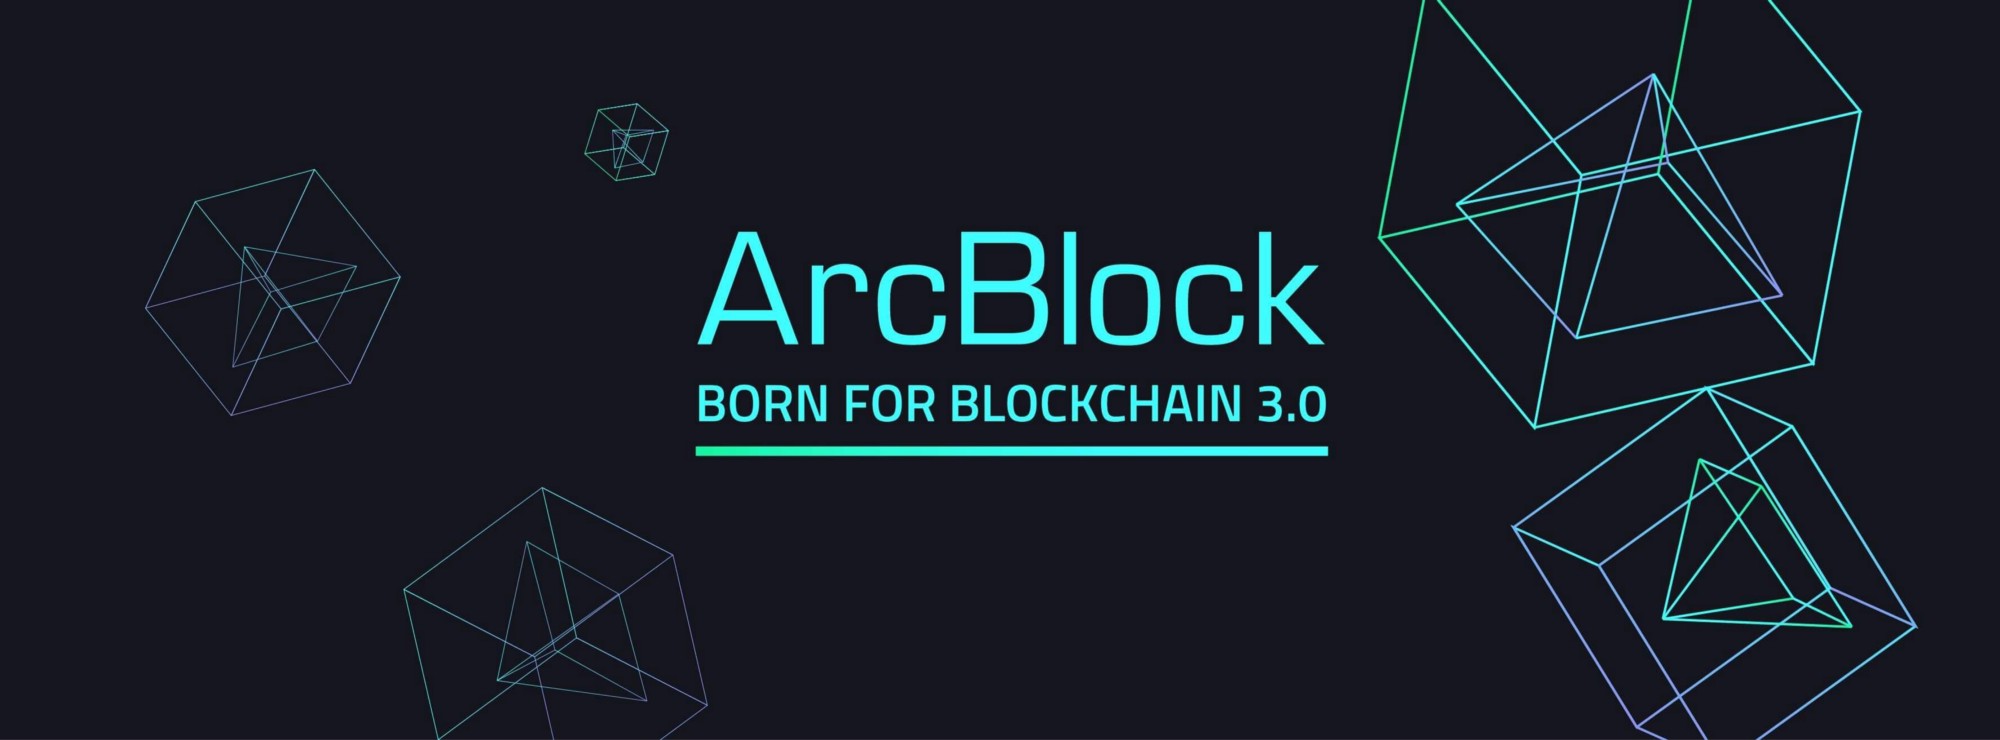 Arcblock crypto forex talks for growing